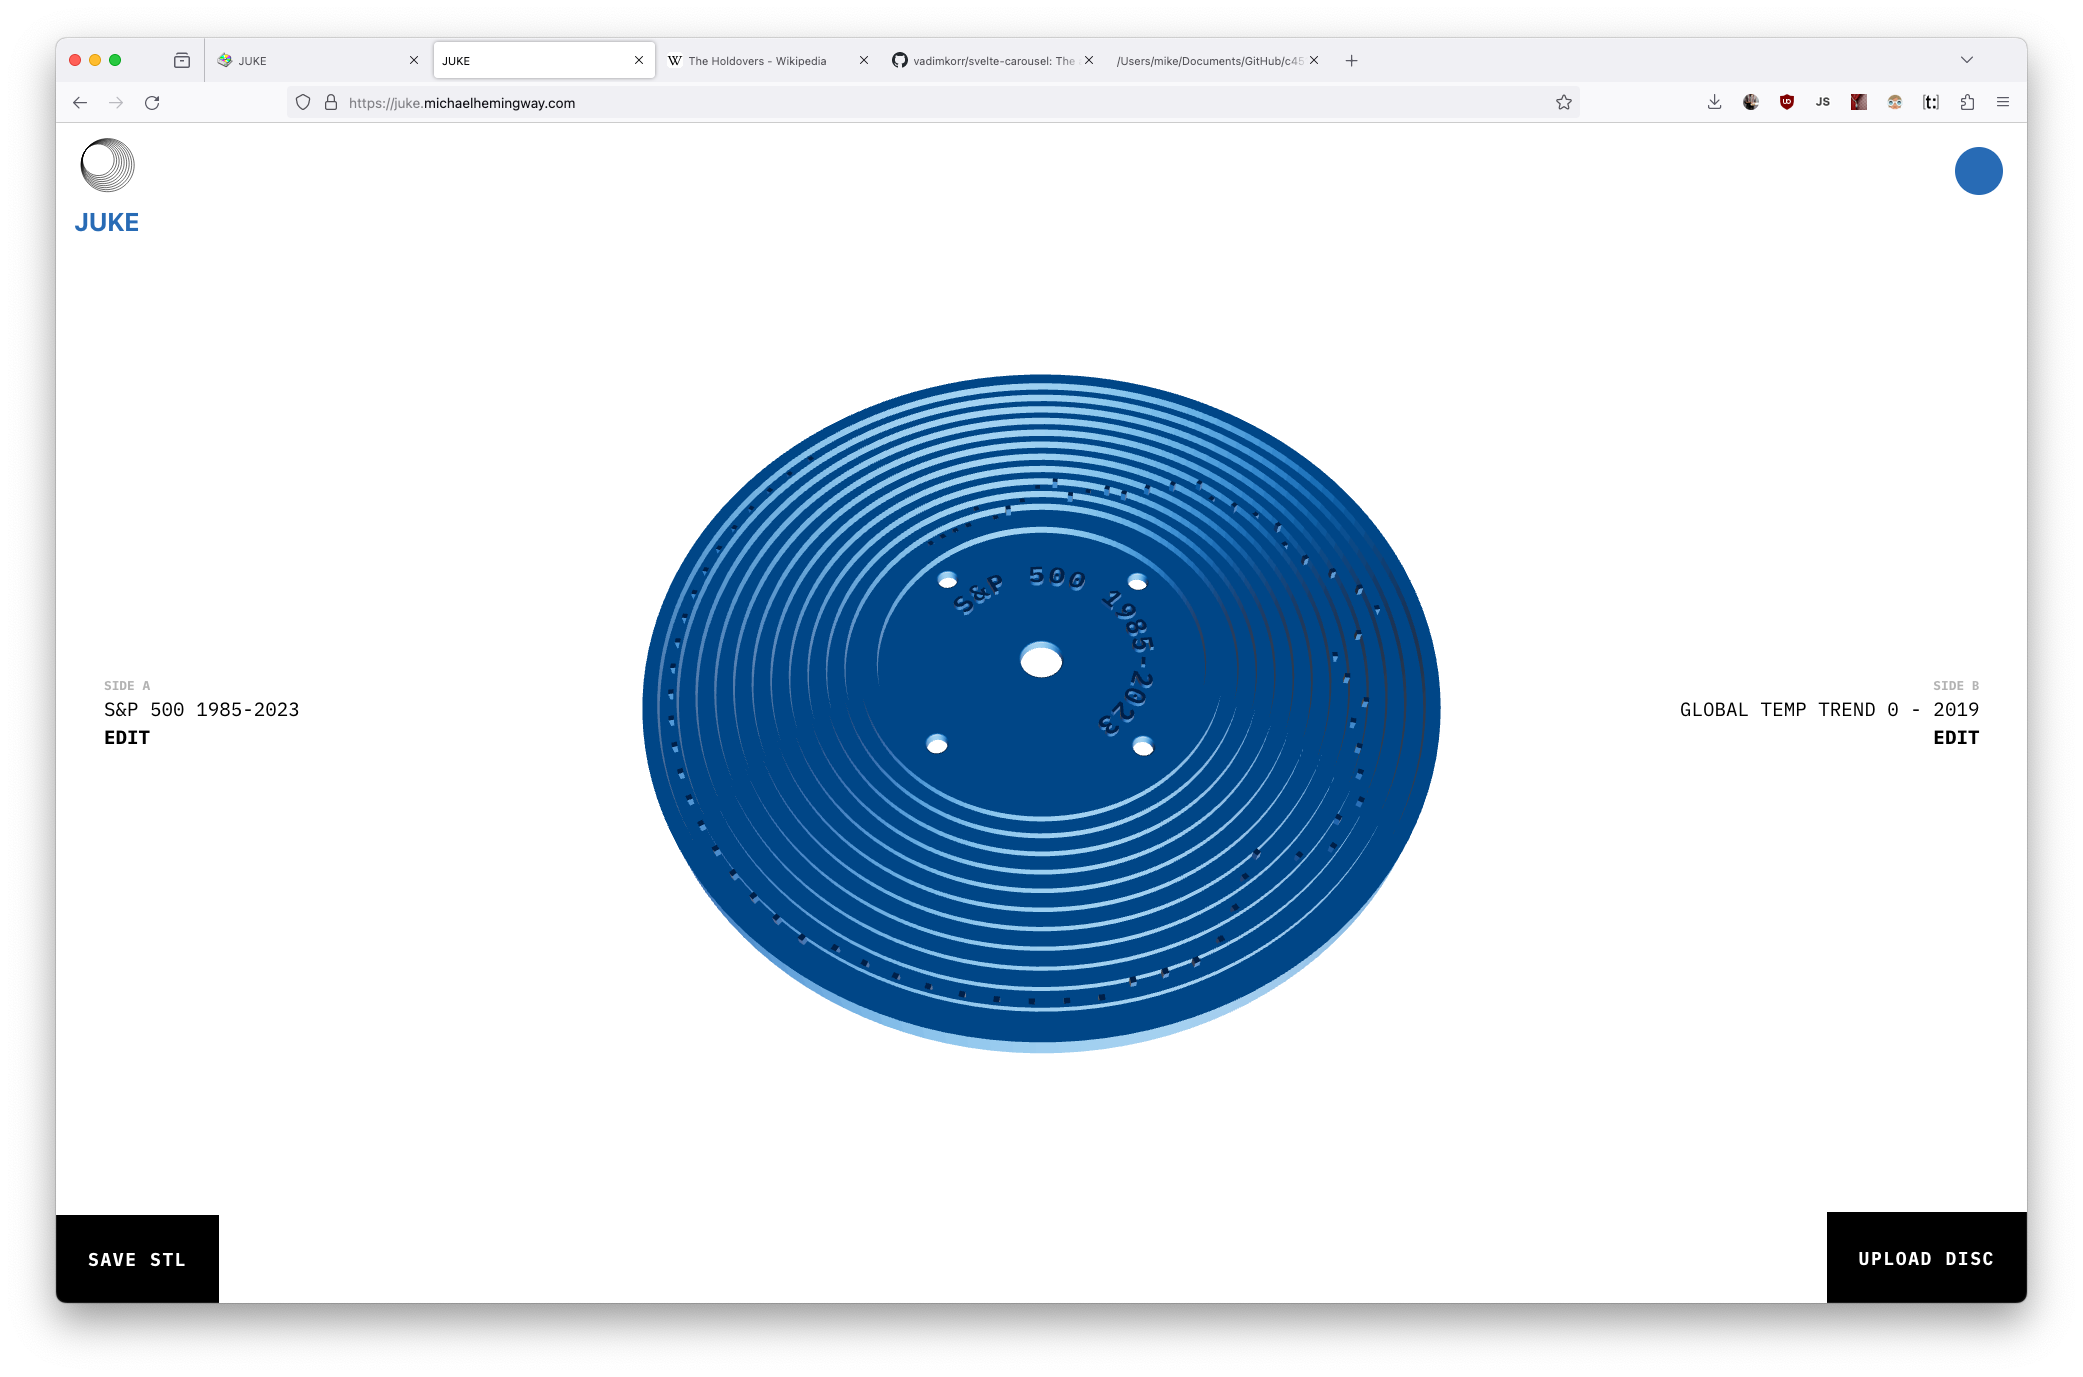 Main app interface, showing a spinning blue disk on a white background, light theme